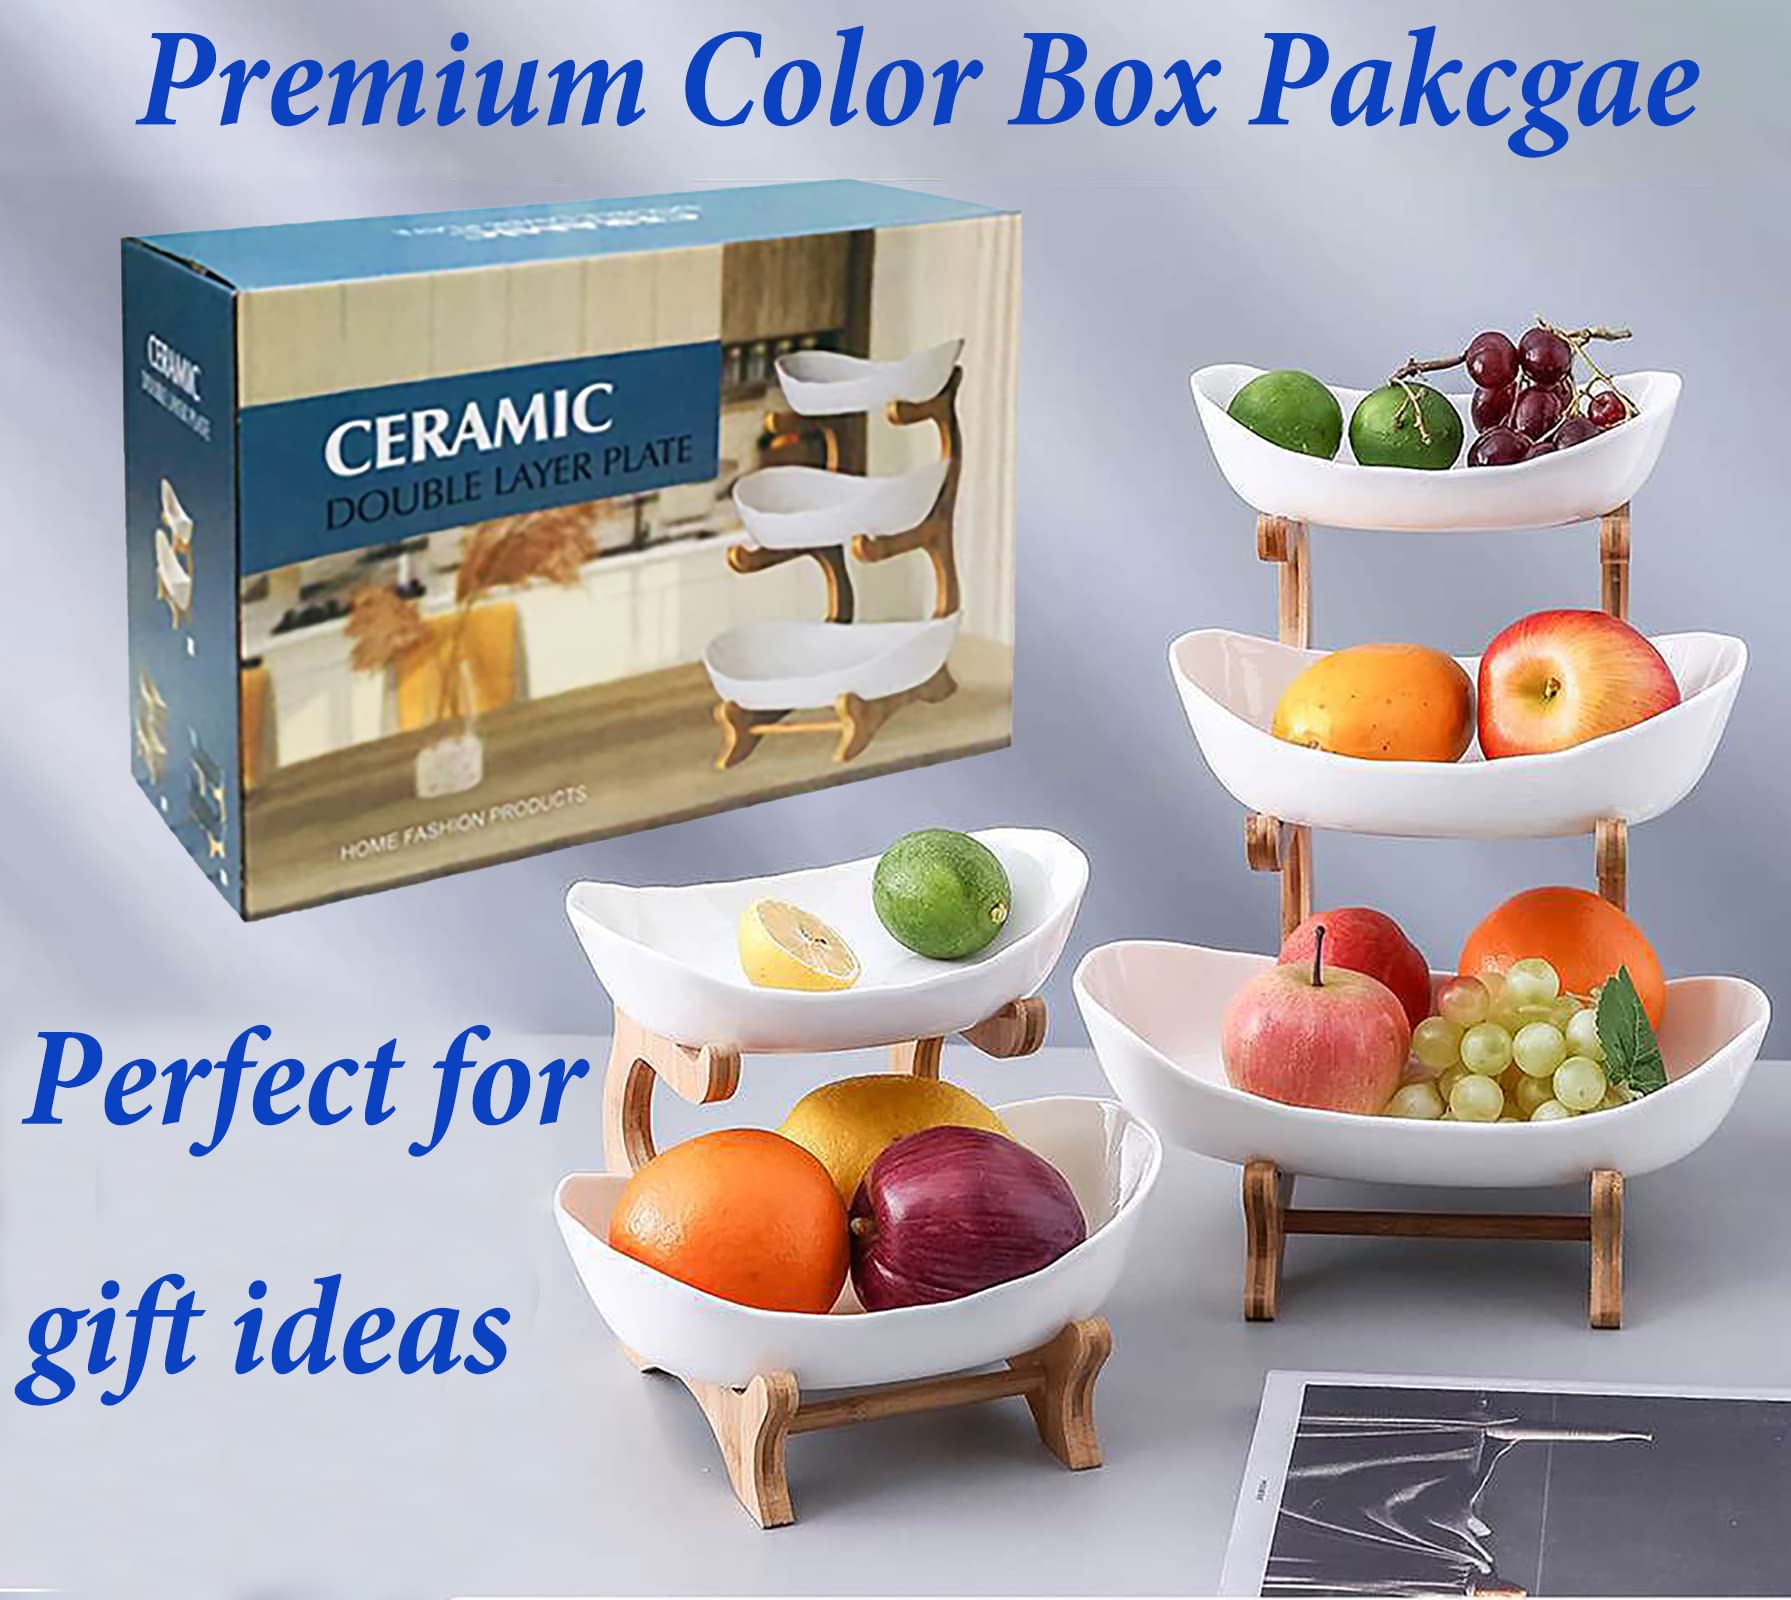 fghuim 3 Tier Ceramic Fruit Bowls with Bamboo Stand,Decorative Ceramic Friut Bowl with Bamboo Holder for Kitchen Counter White(Include 1 Y Stainless Steel Peeler,3 Oranger Finger Peelers)